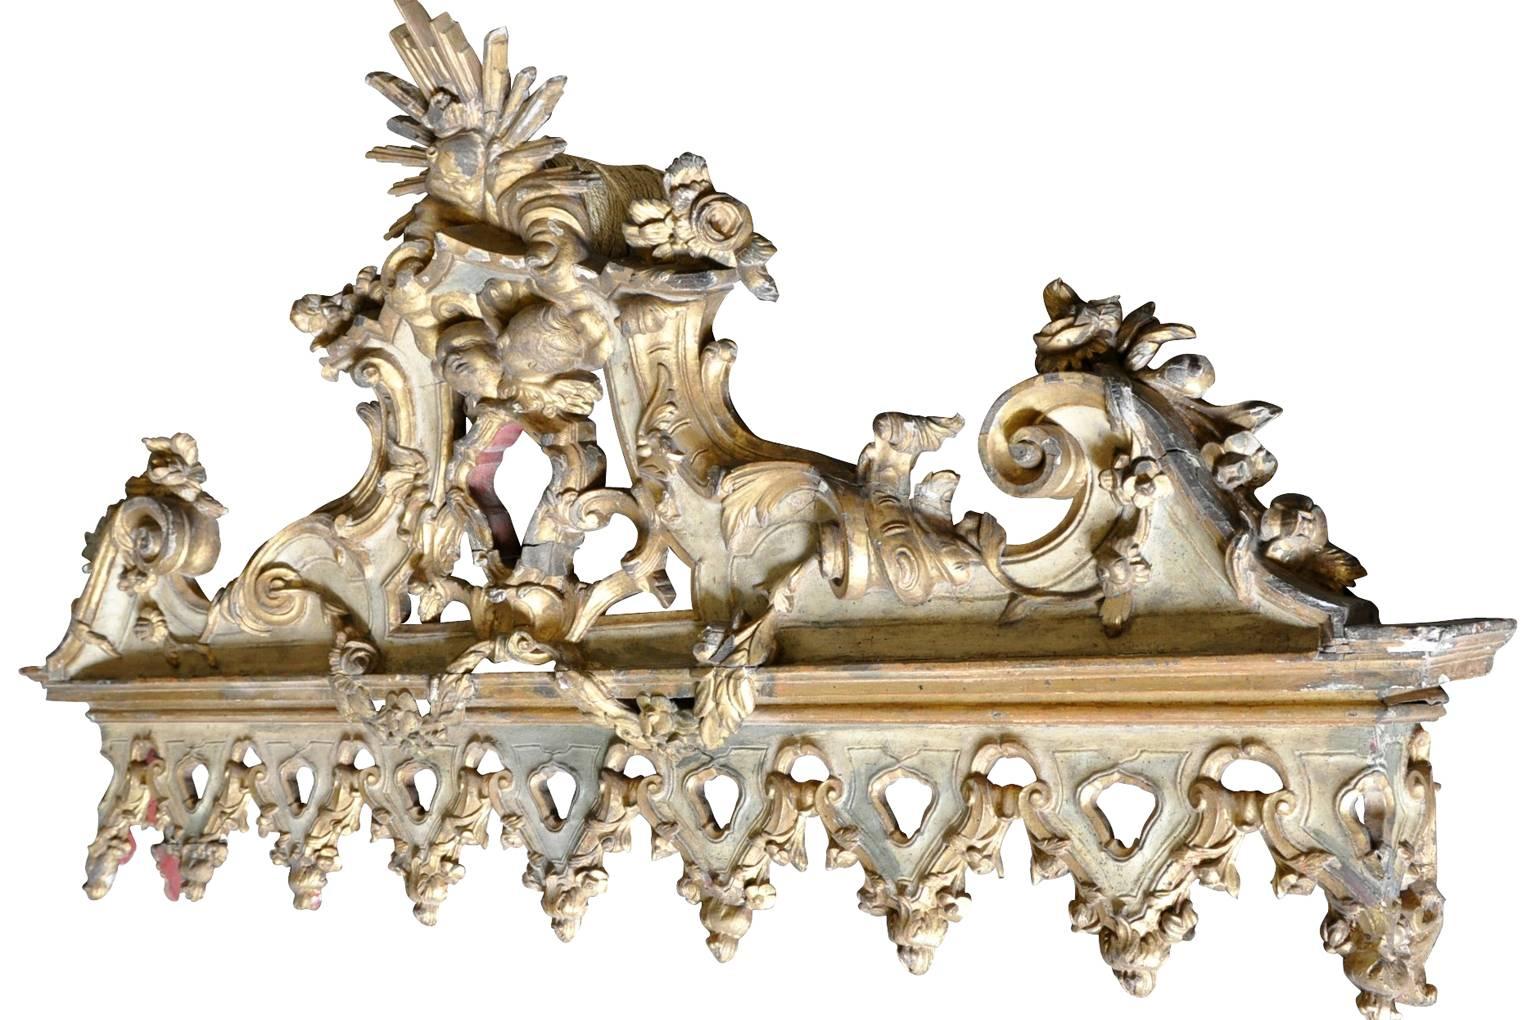 A sensational 18th century architectural fragment - pediment in polychromed and giltwood. Decorated with two charming putti, a sacred heart and sunburst. This wonderful piece origins from a hotel in Portugal. It will serve beautifully incorporated